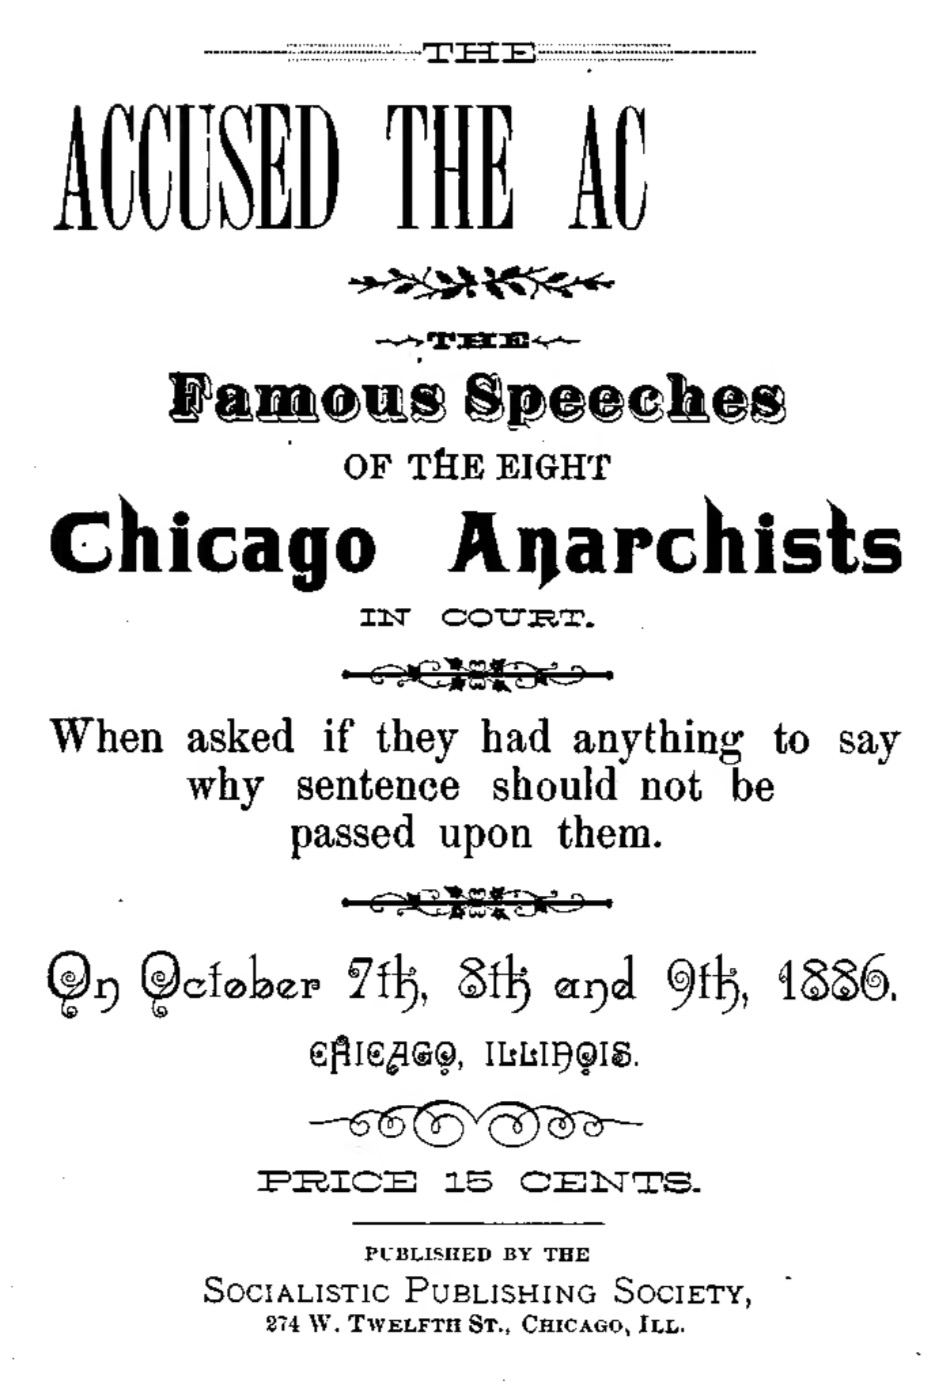 The Accused the Accusers : The Famous Speeches of the Eight Chicago Anarchists in Court (1886) by August Spies, Michel Schwab, Oscar Neebe, Adolph Fischer, Louis Lingg, George Engel, Samuel Fielden, Albert R. Parsons